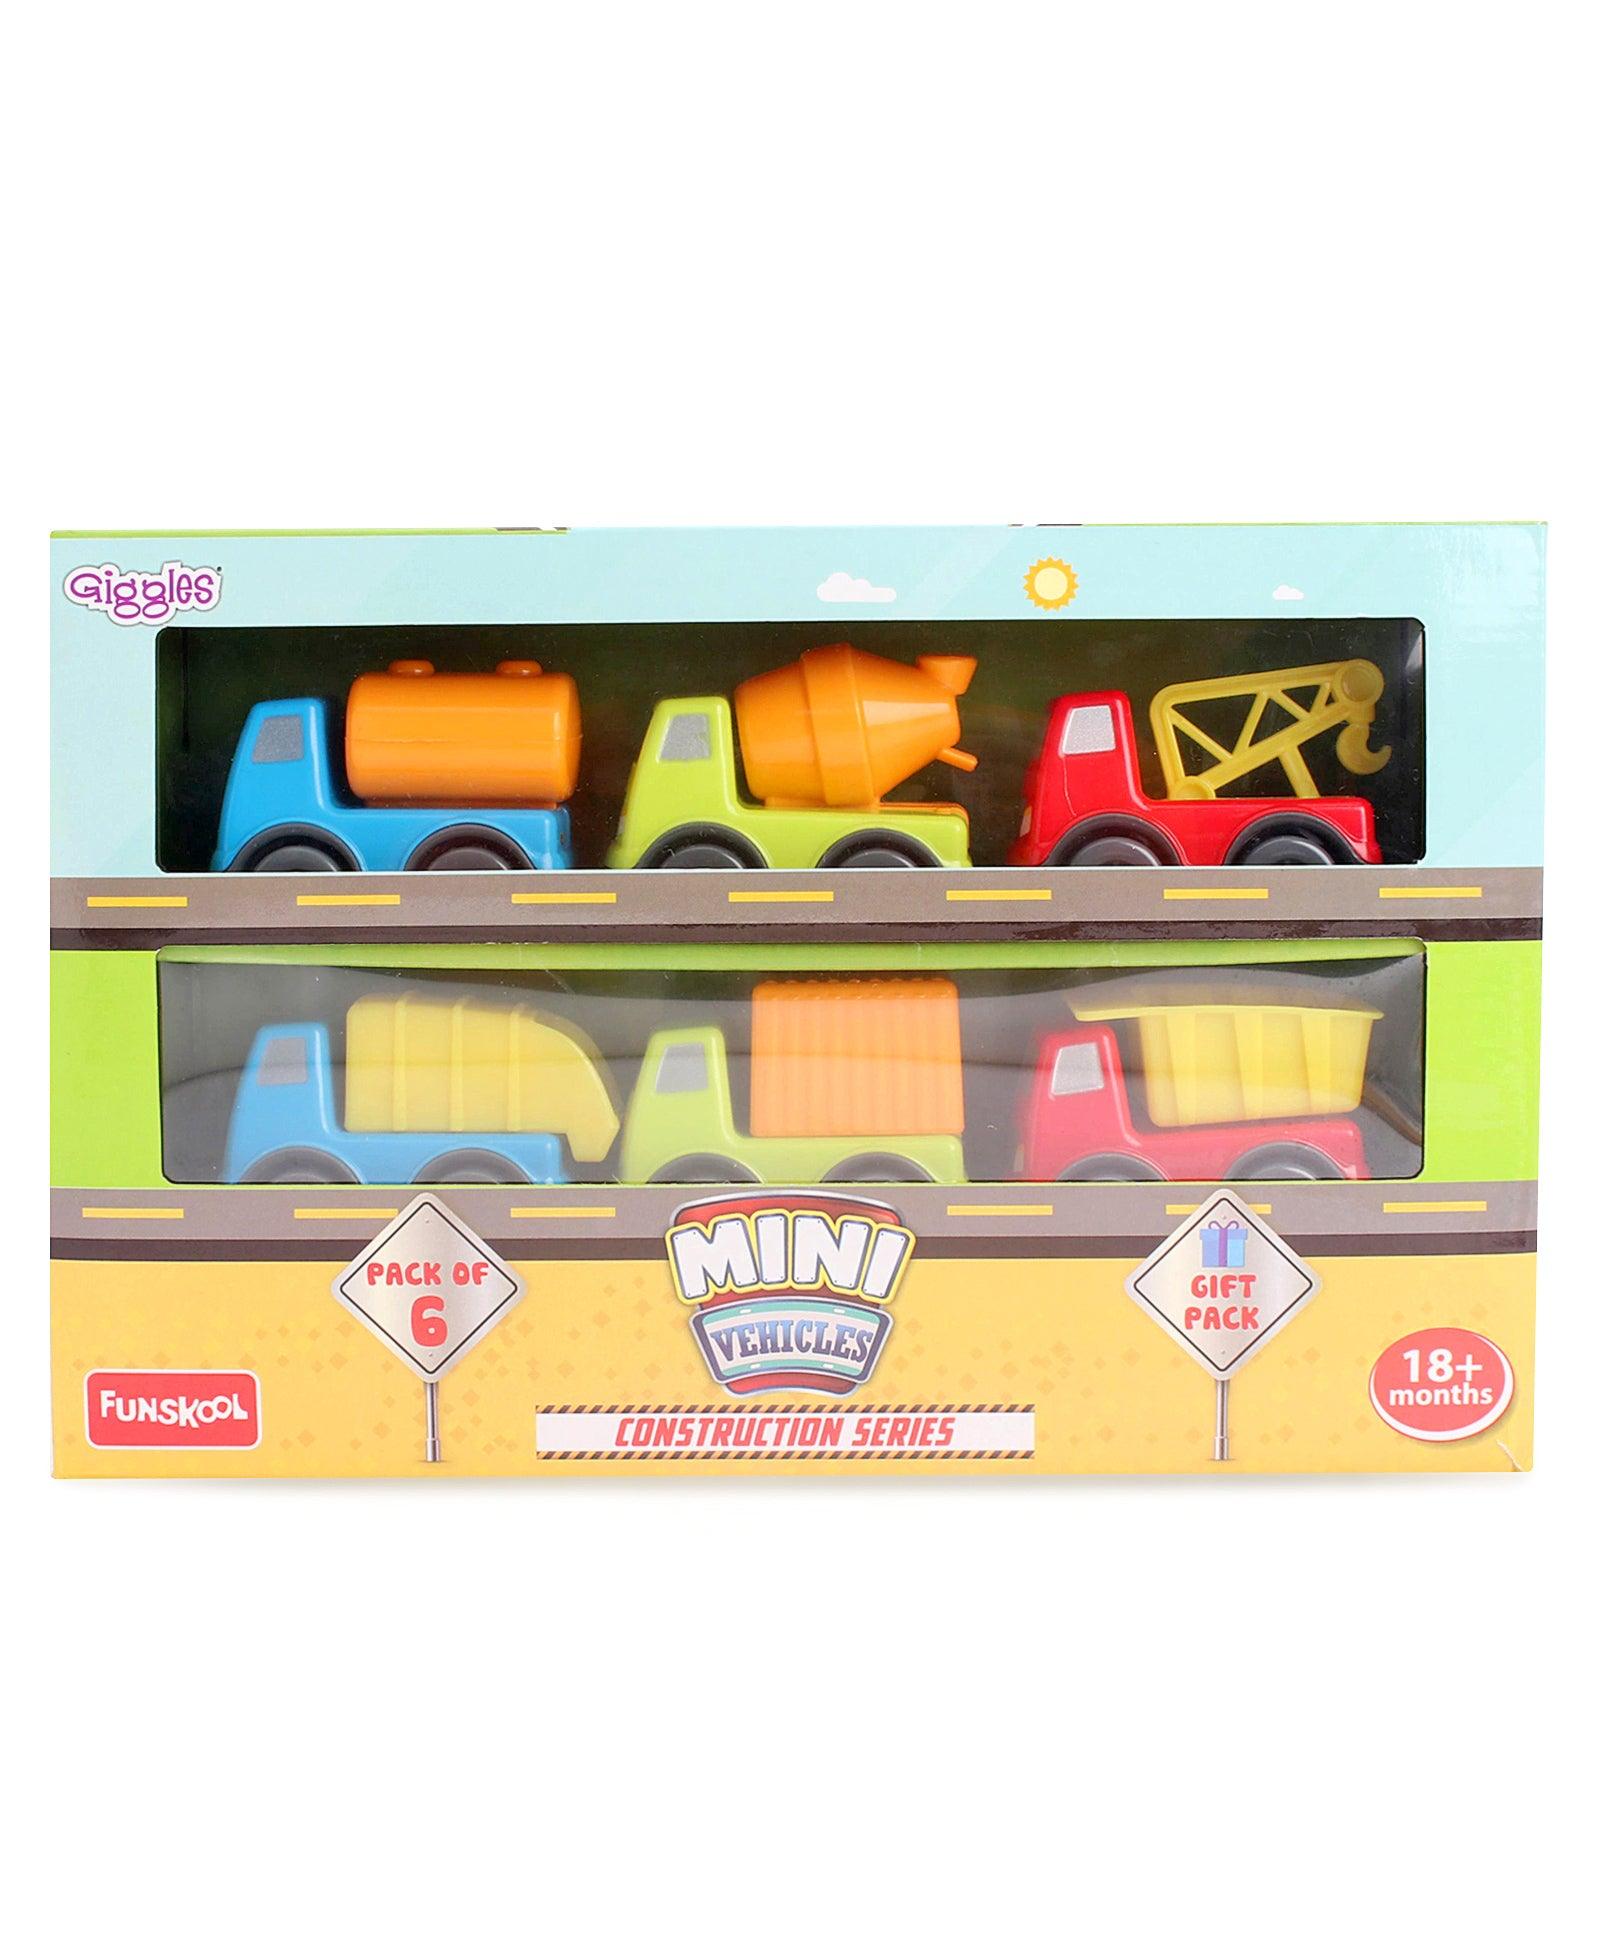 Funskool Giggles Mini Vehicle Construction Series Gift Pack of 6 for Ages 2+